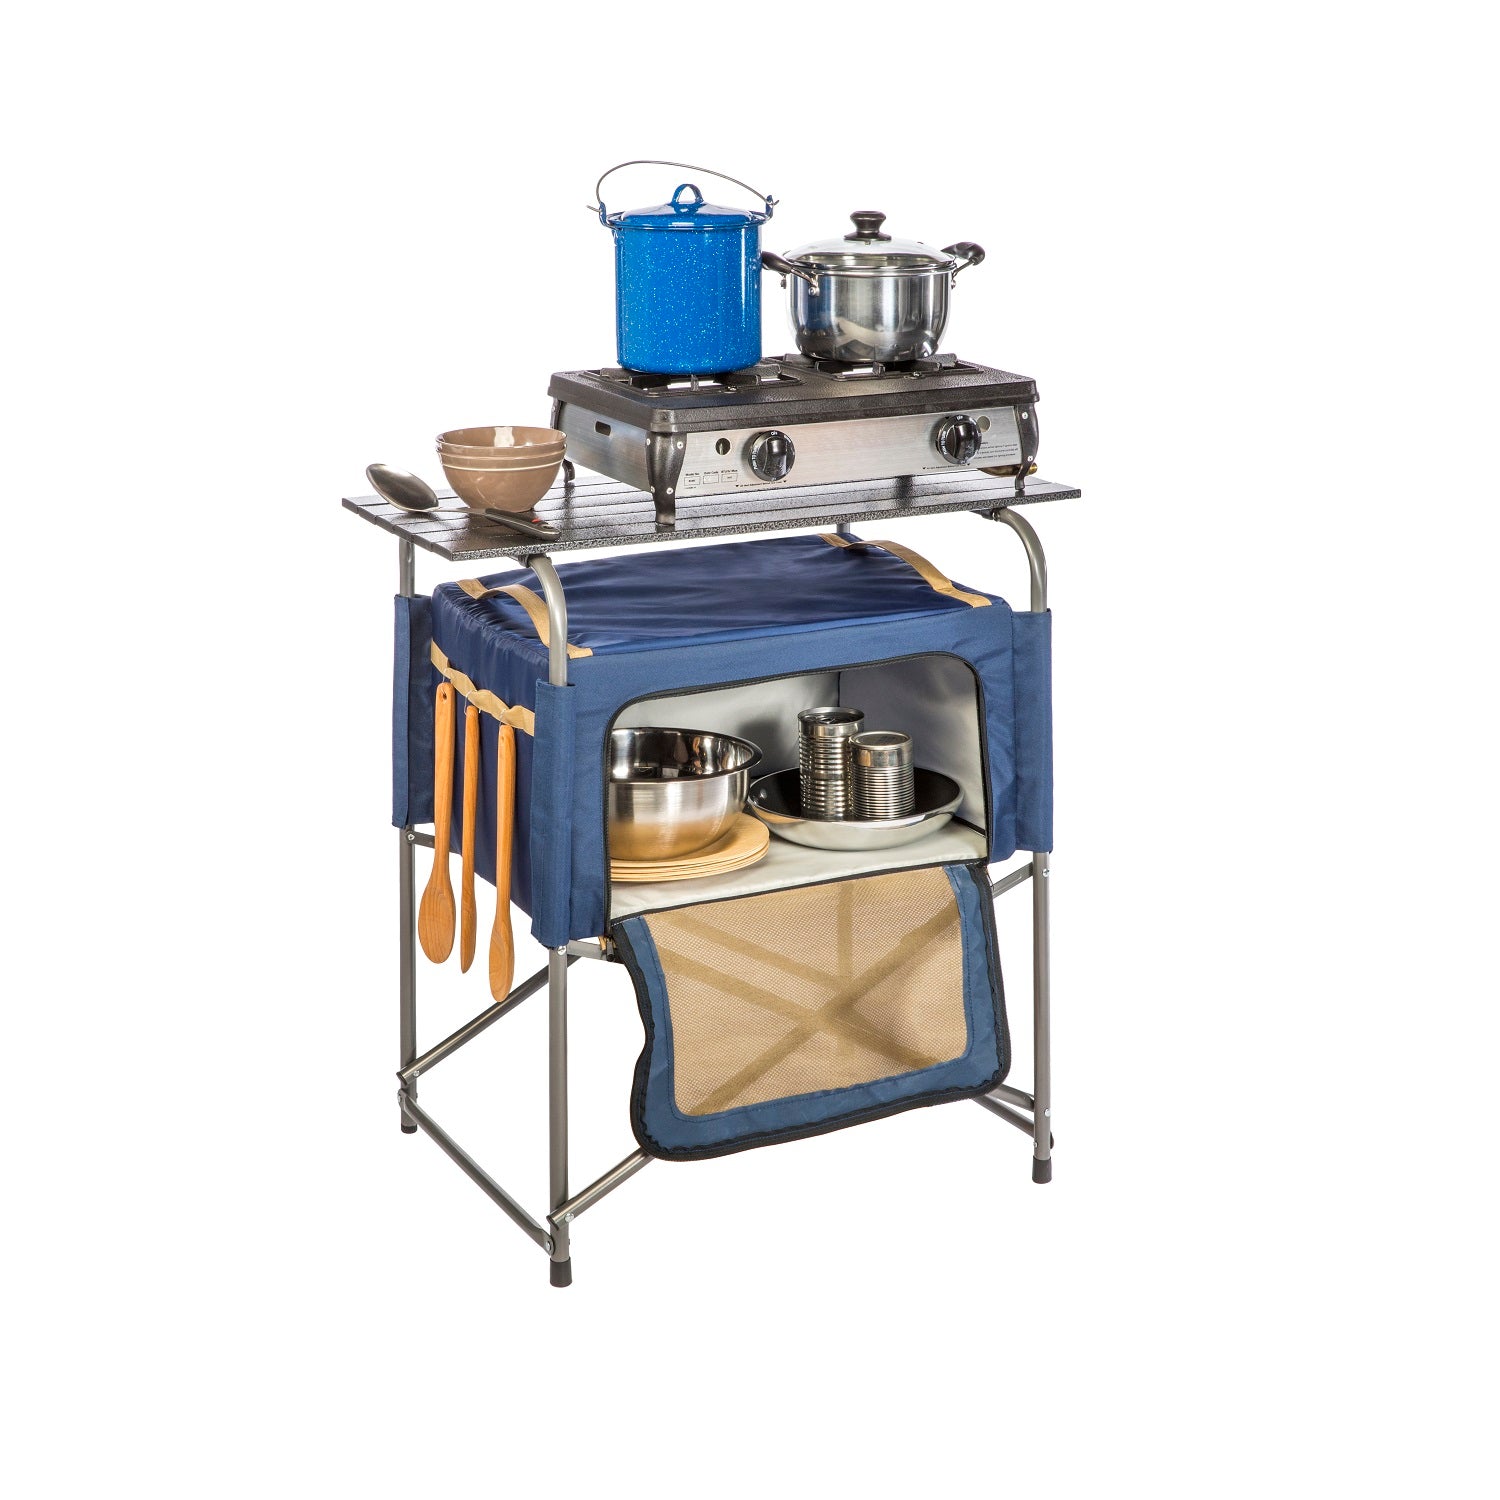 Kamp-Rite EZ Prep Table with Insulated Bag